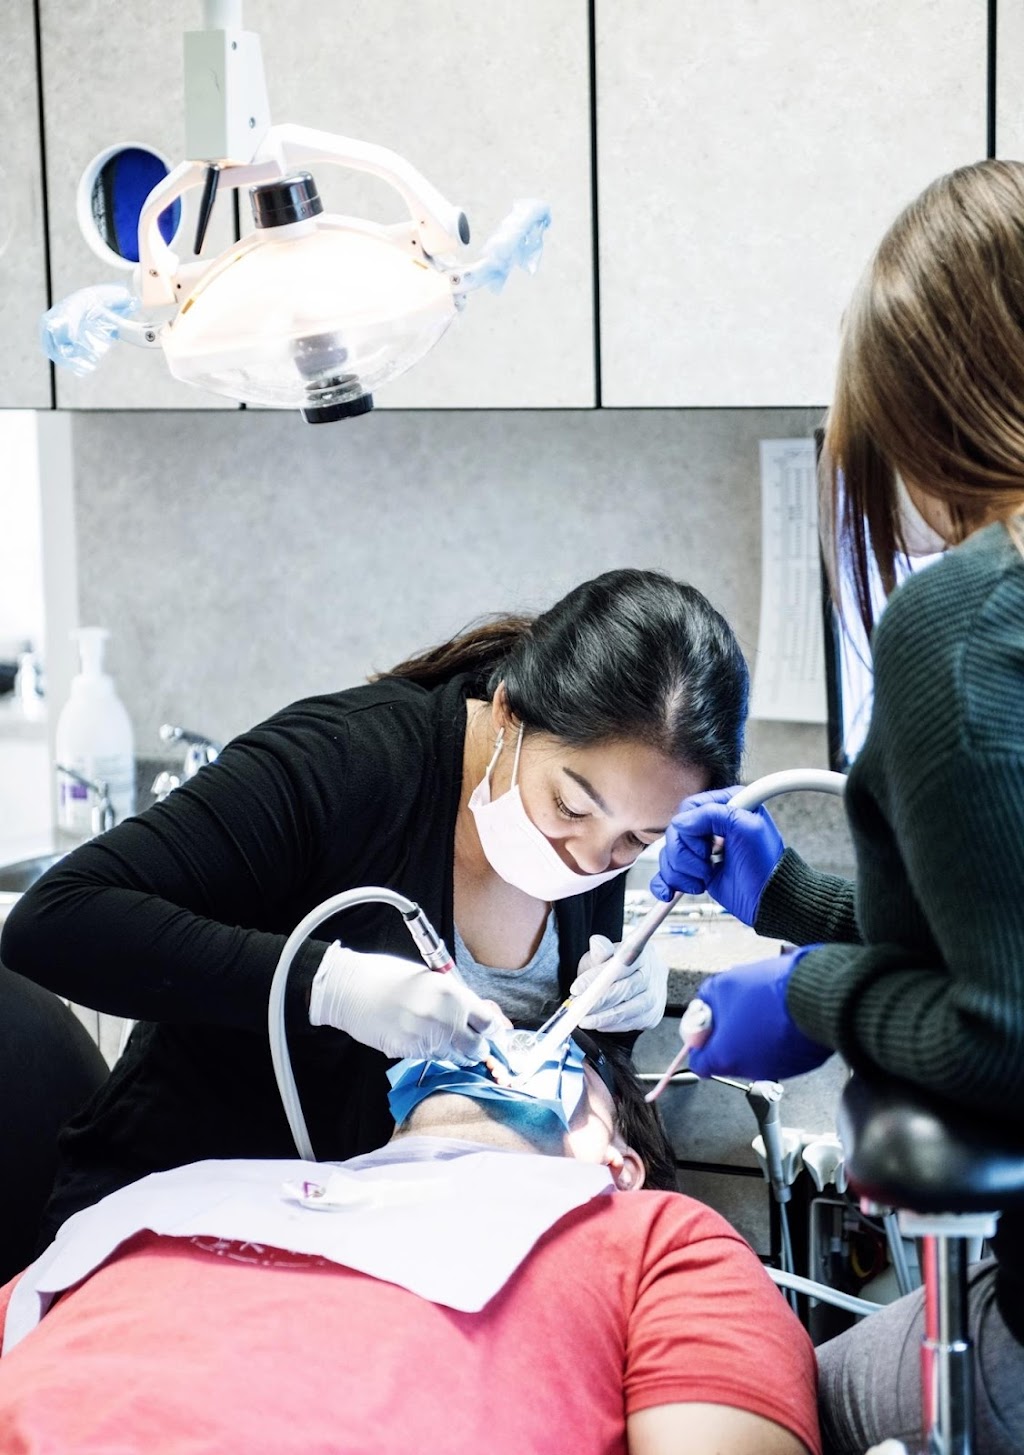 Valley Dental Clinic | dentist | 231 2 Ave, Strathmore, AB T1P 1L4, Canada | 4039342882 OR +1 403-934-2882